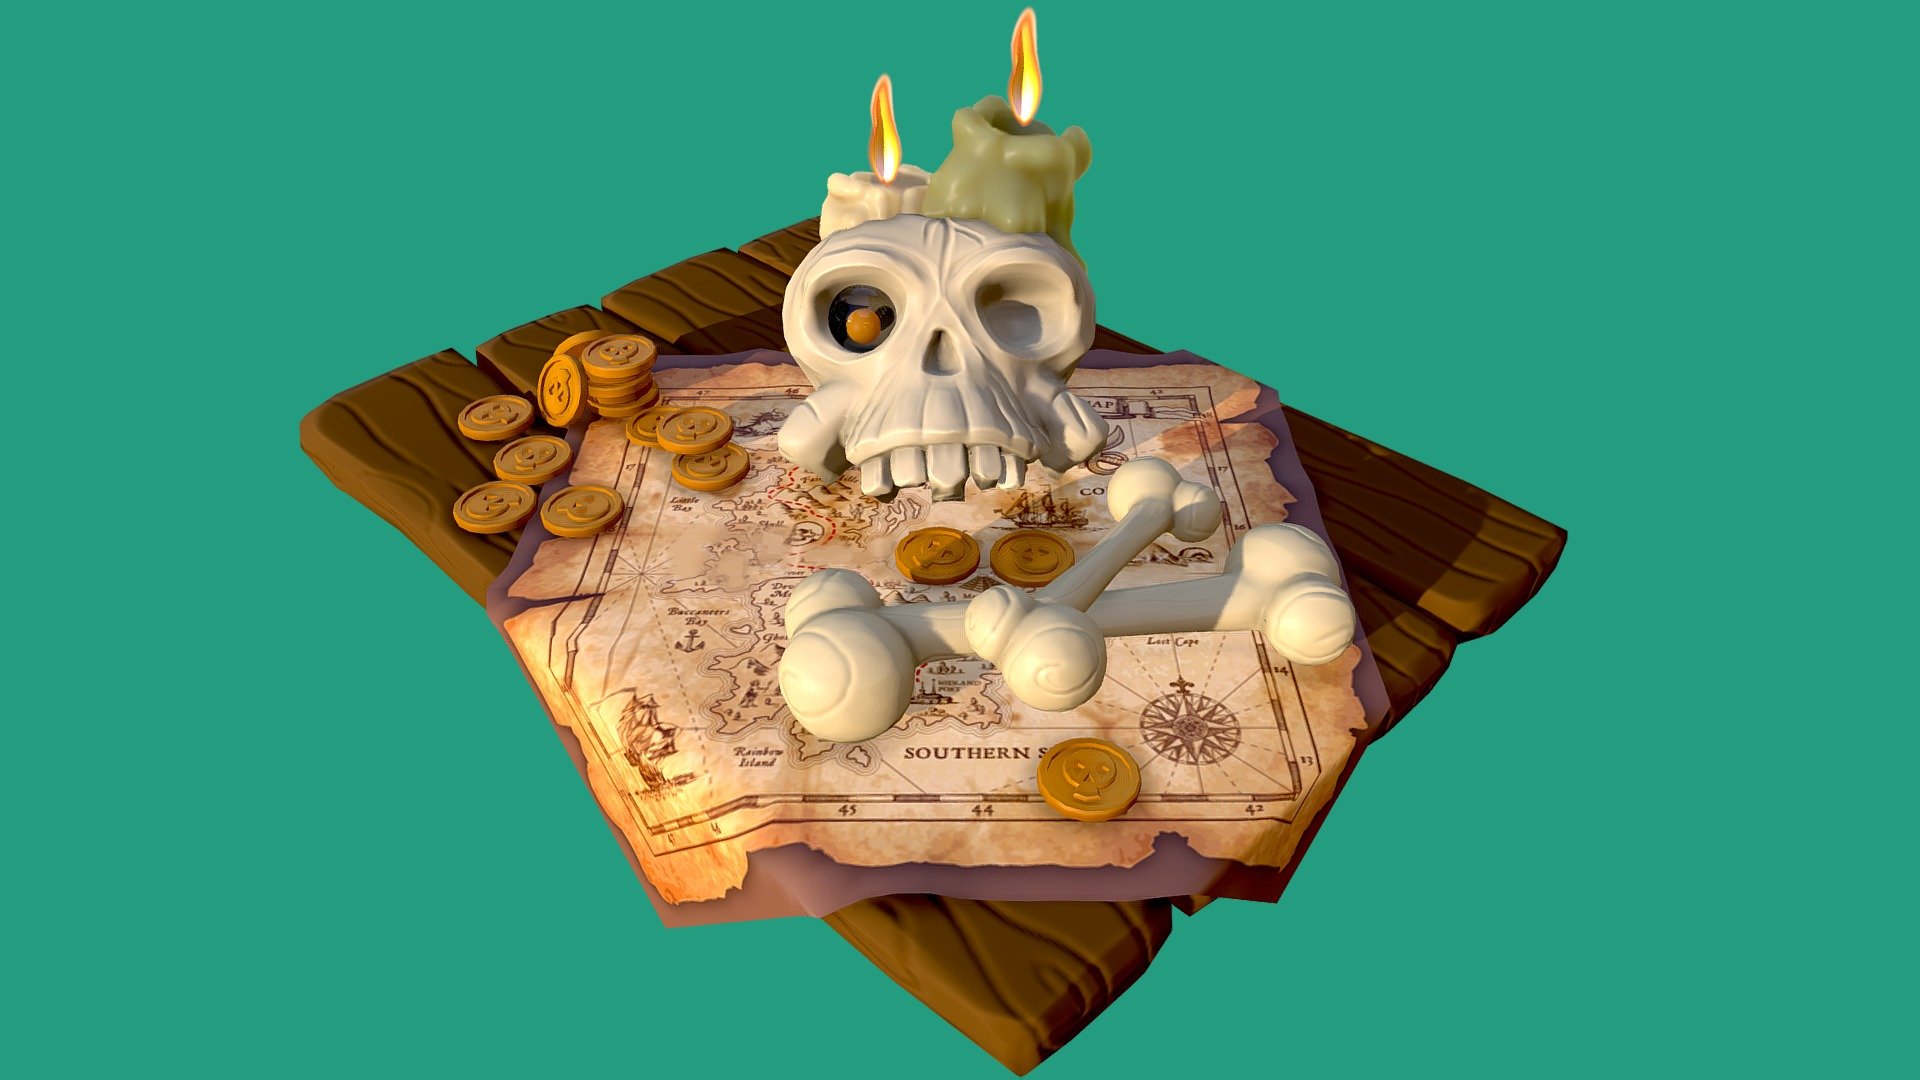 pirate-treasure-map-download-free-3d-model-by-vetech82-542d002